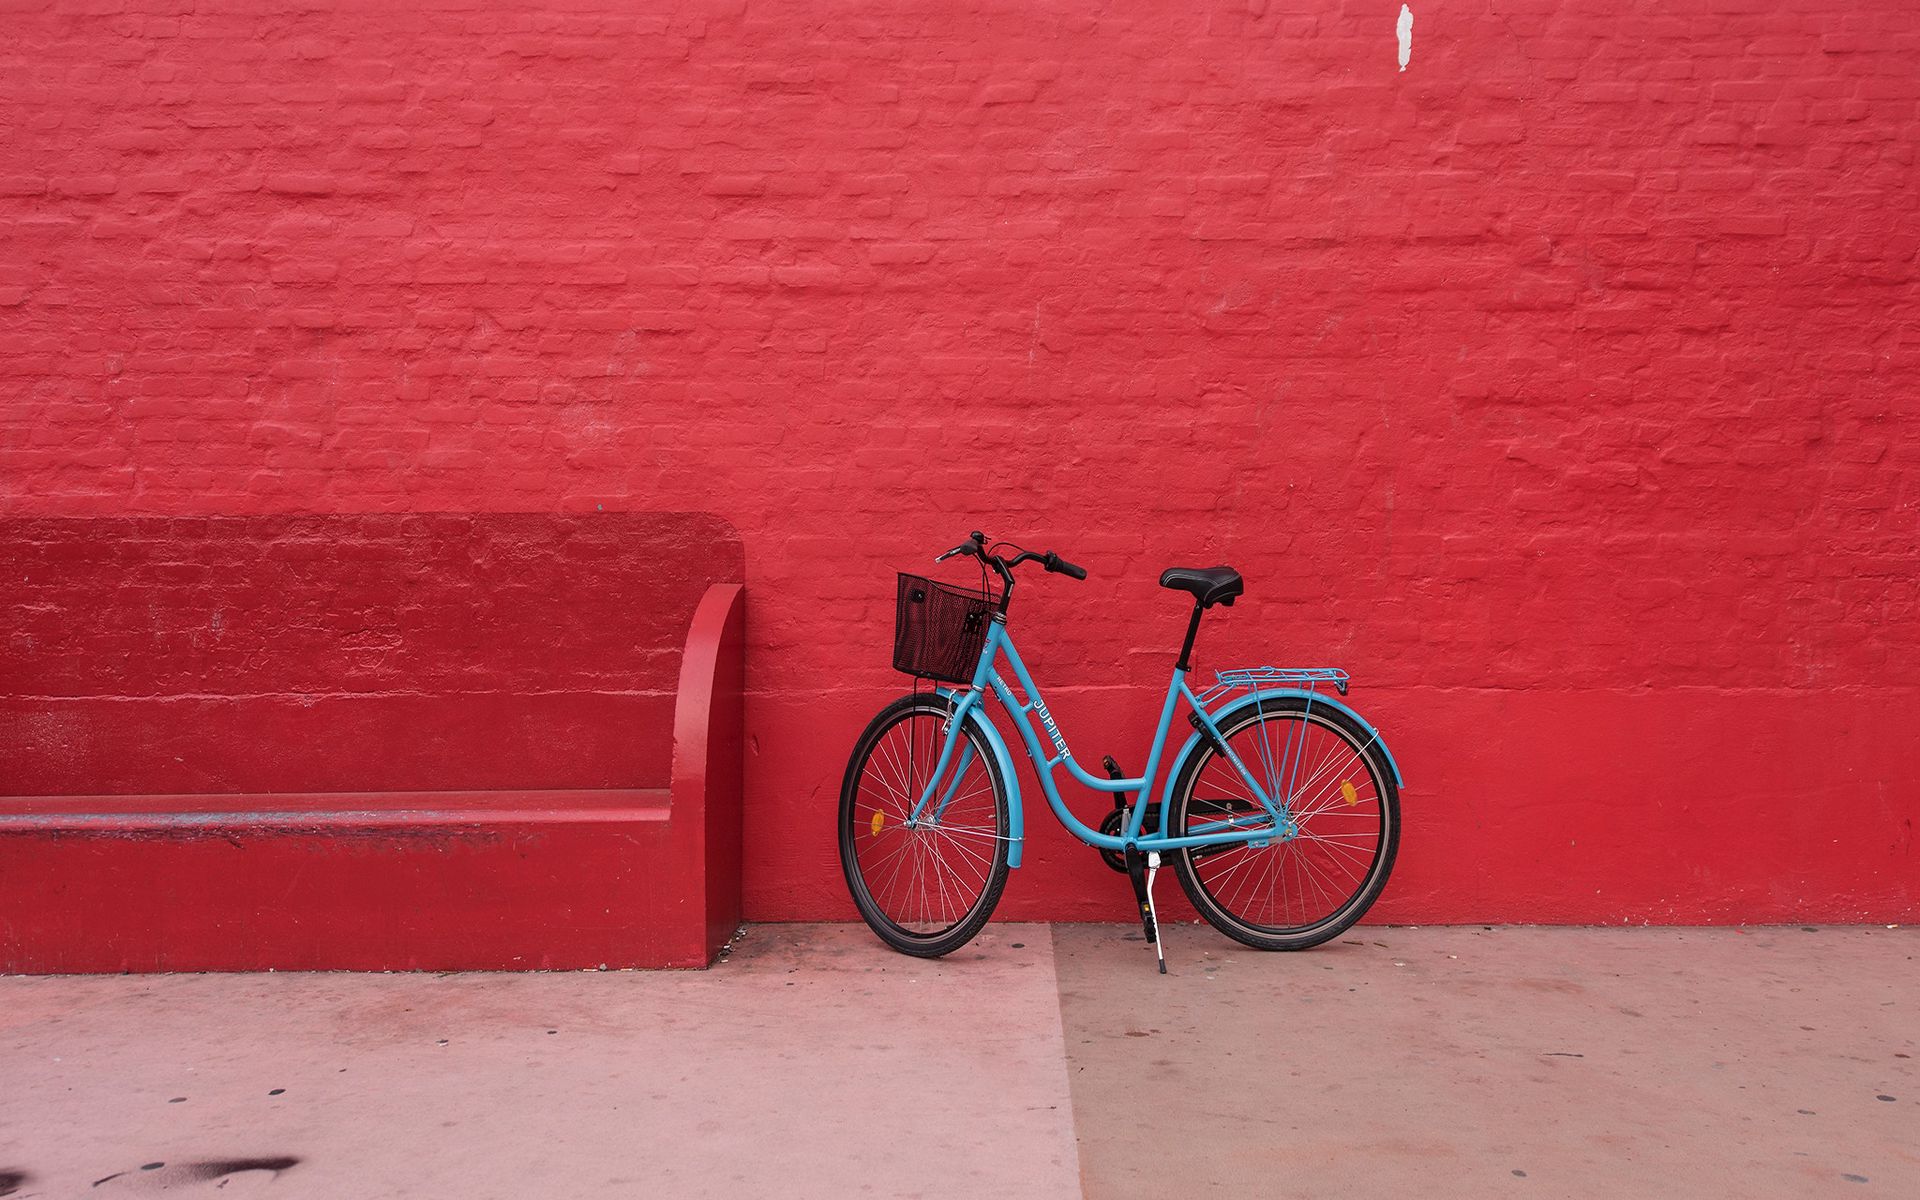 Download wallpaper 1920x1200 bicycle, wall, red widescreen 16:10 hd  background